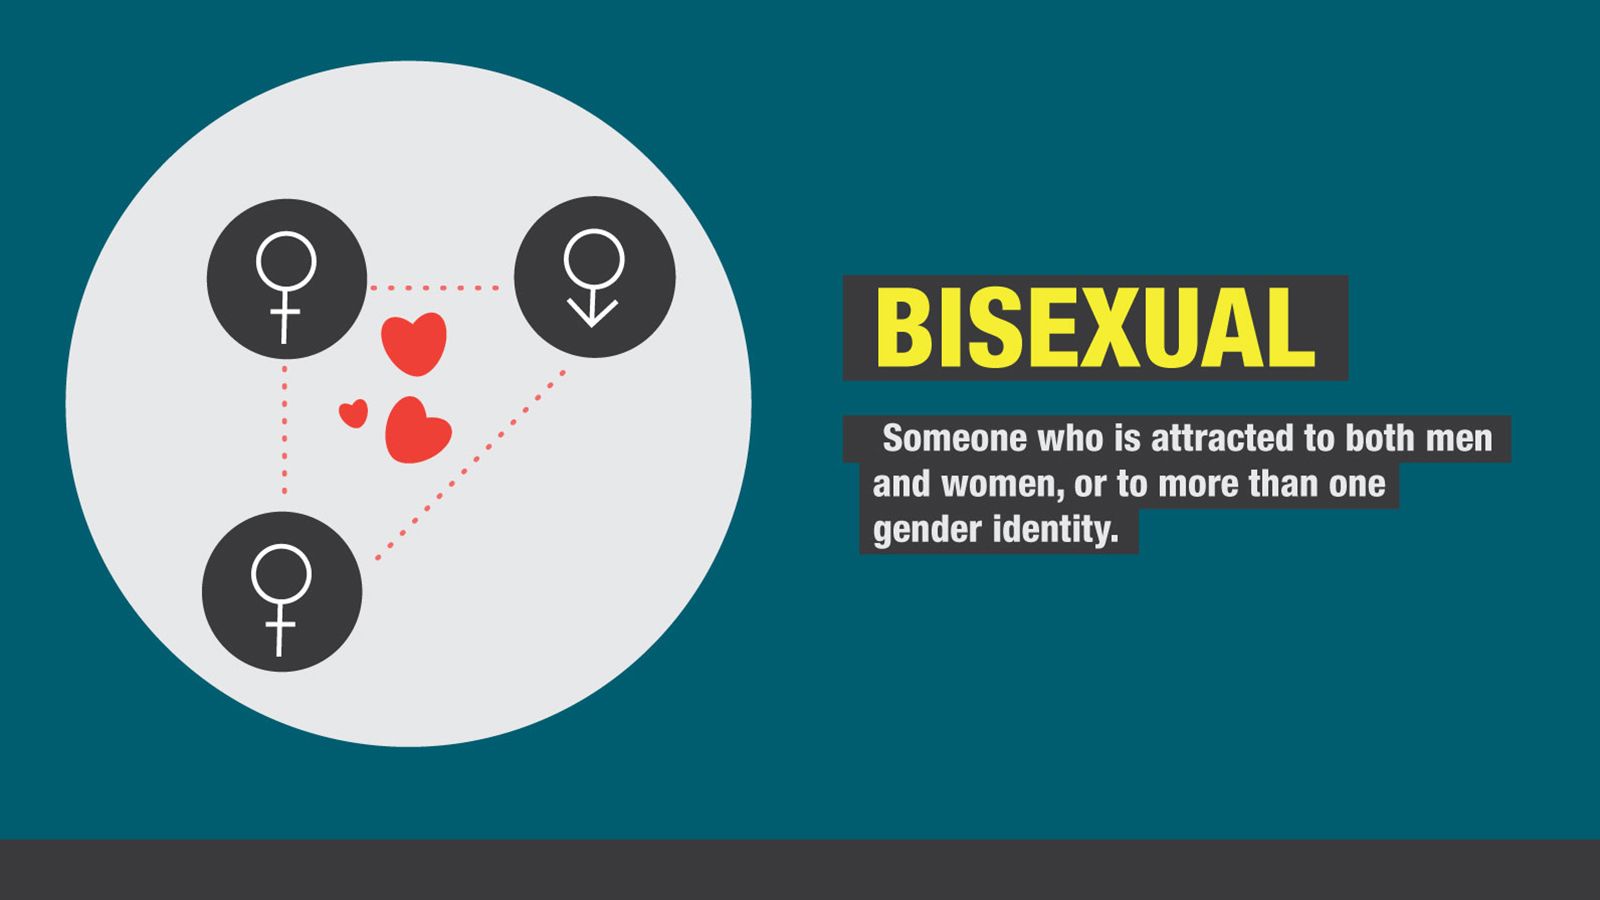 Black Bisexual Women - Bisexuality on the rise, says new U.S. survey | CNN